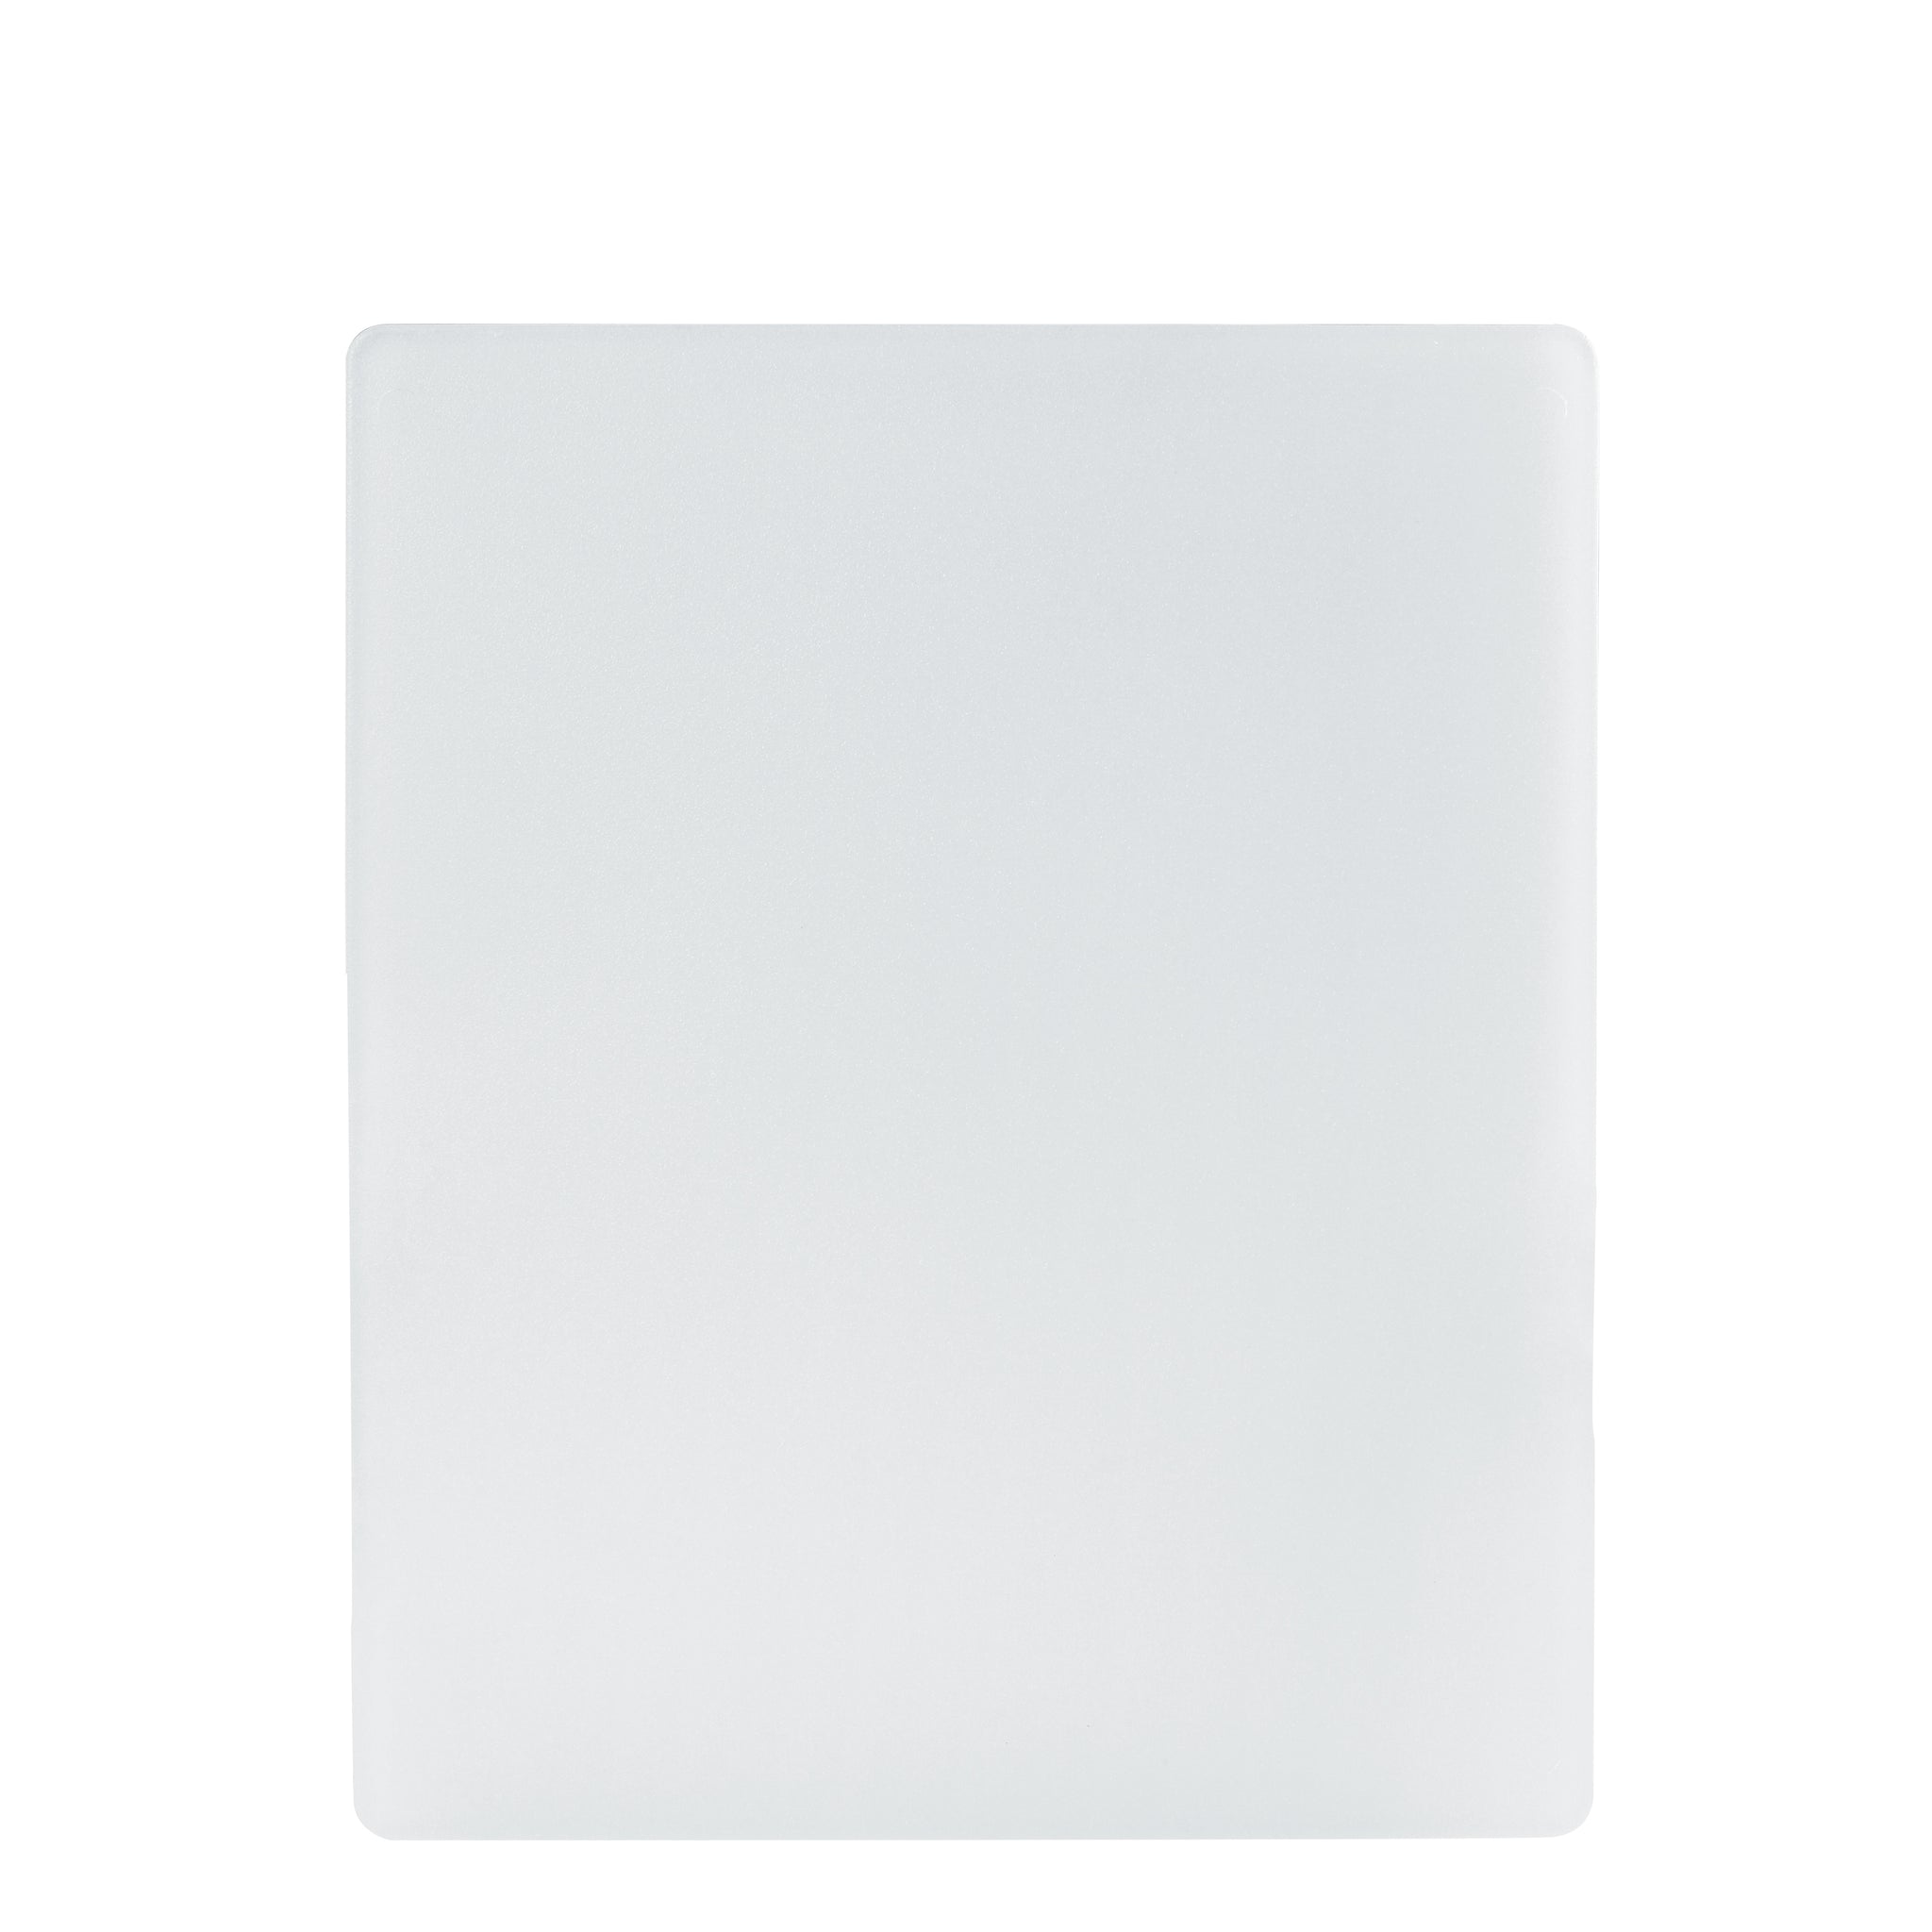 NSF Polysafe Pastry Boards